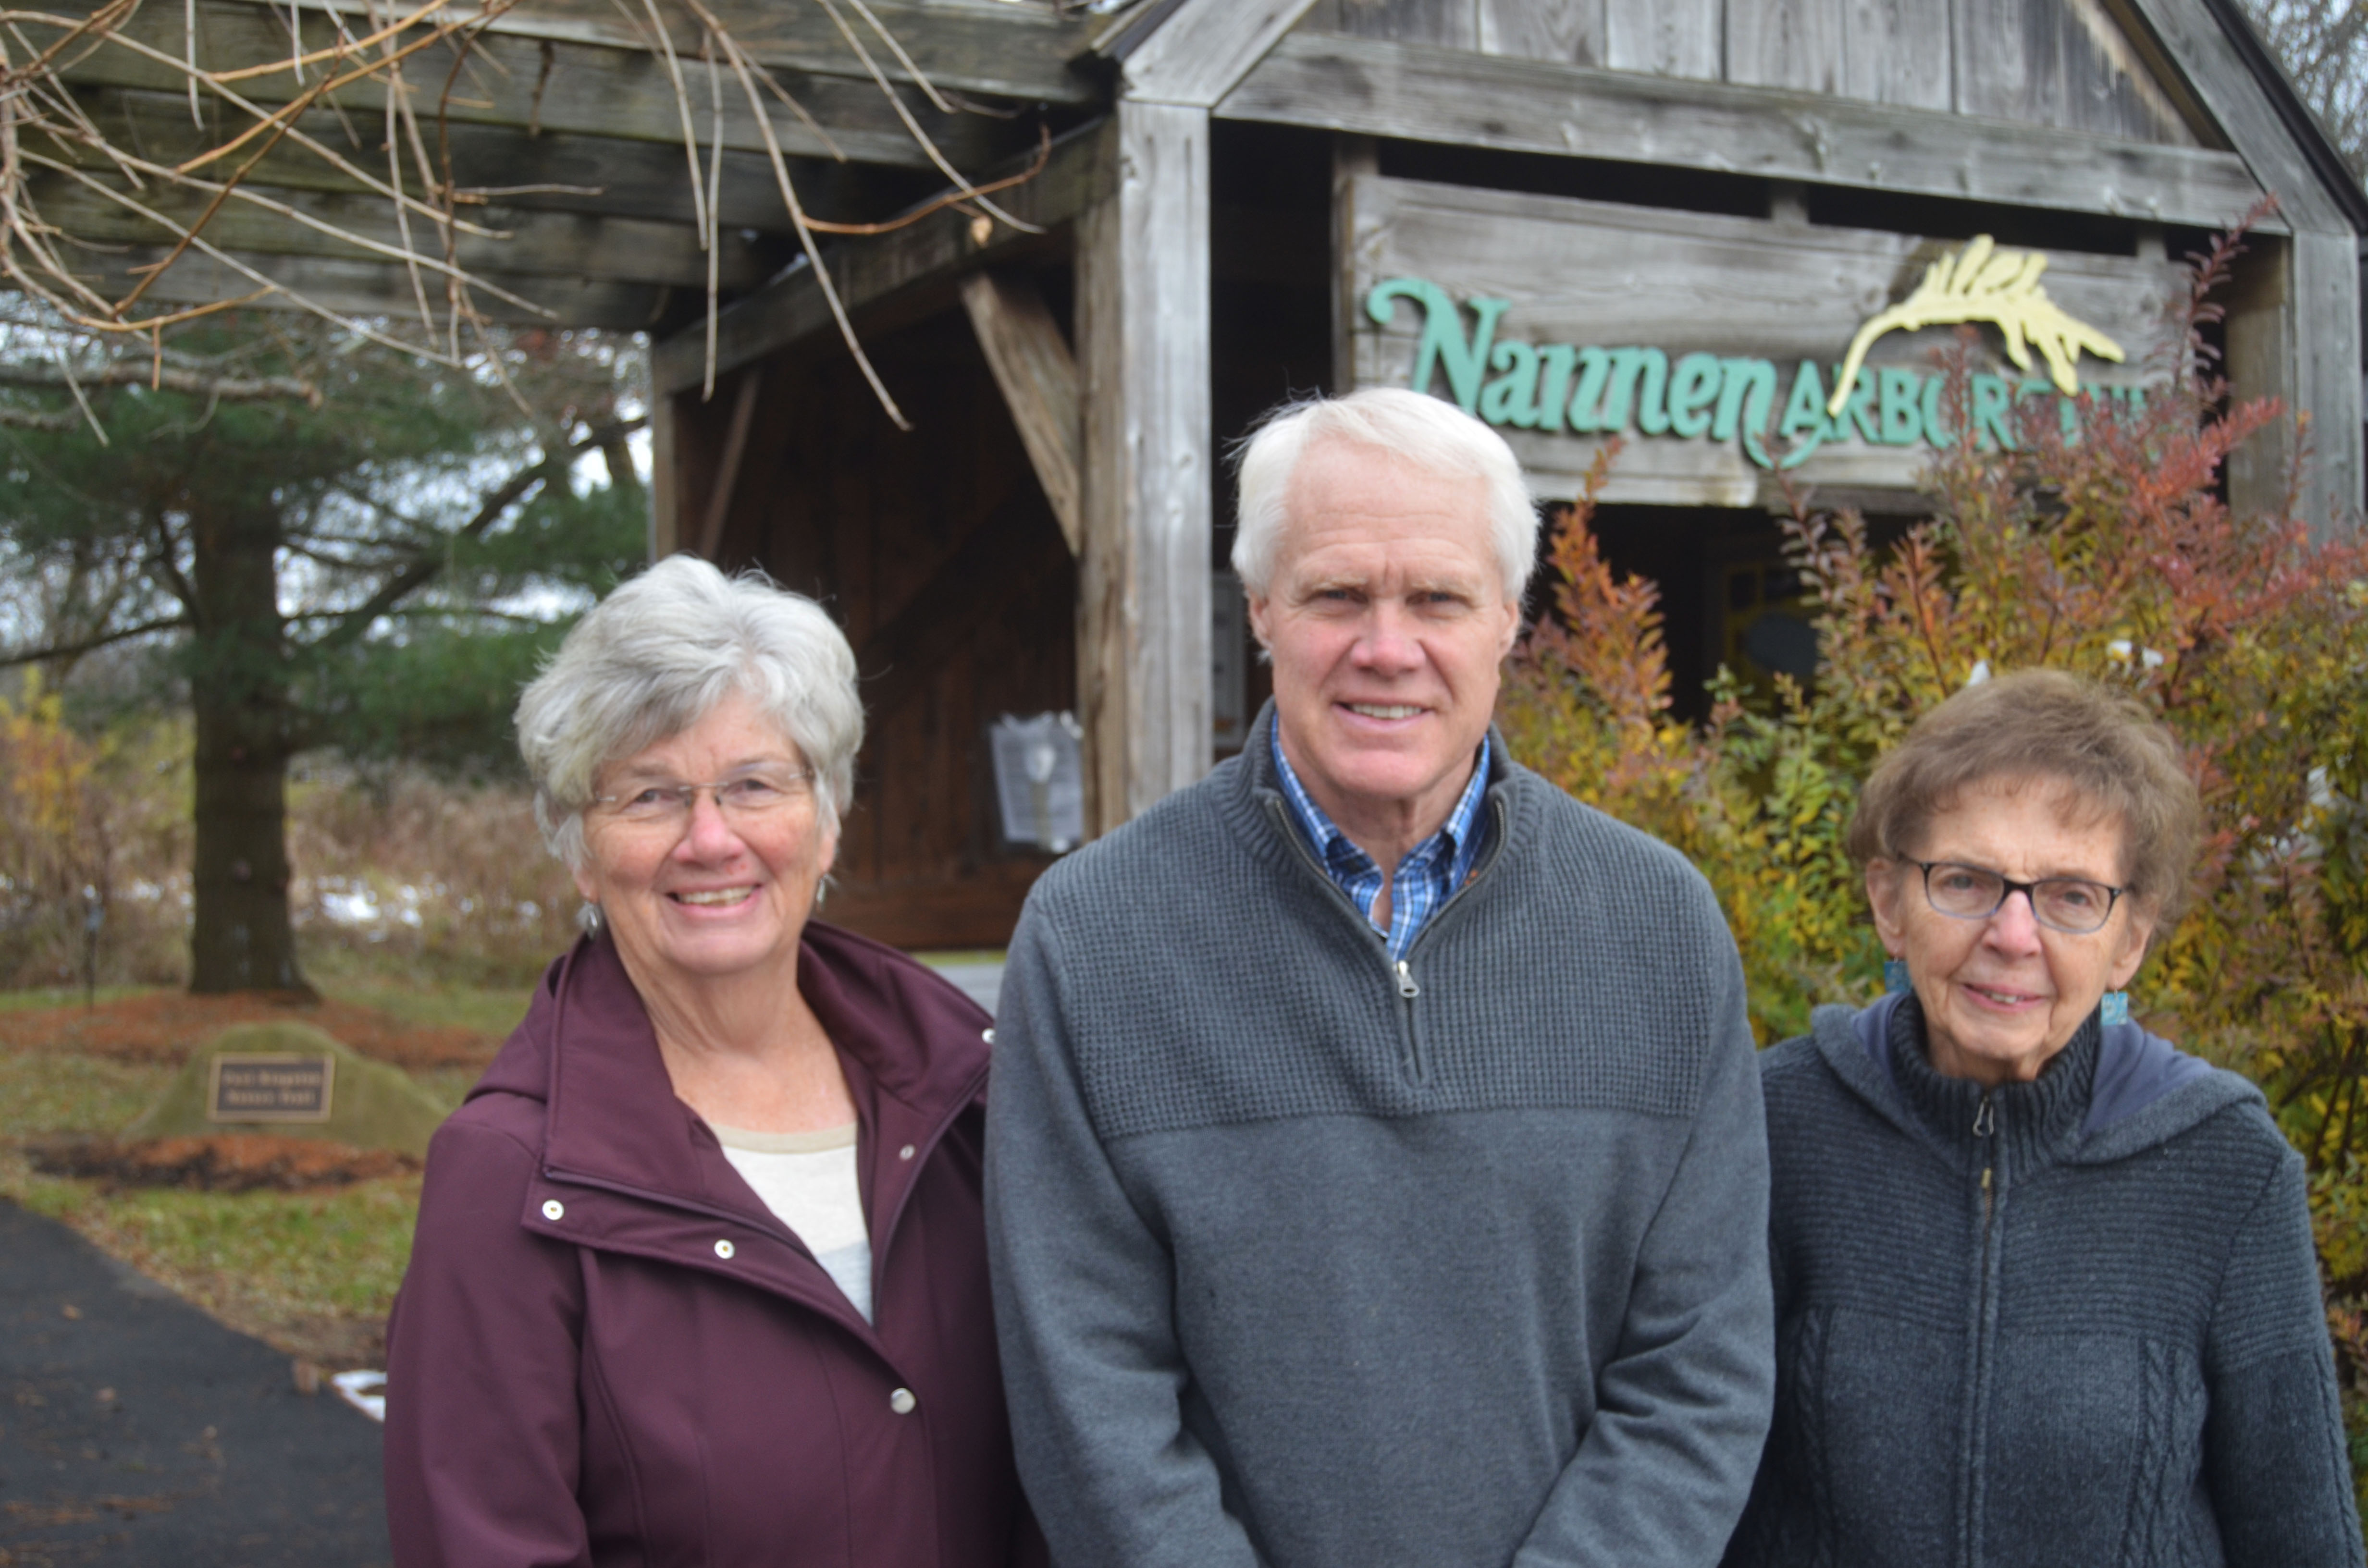 Skip Wilday (center) with Nannen Arboretum Society board members and advocates Nan Miller (left) and Pat Kerl (right).